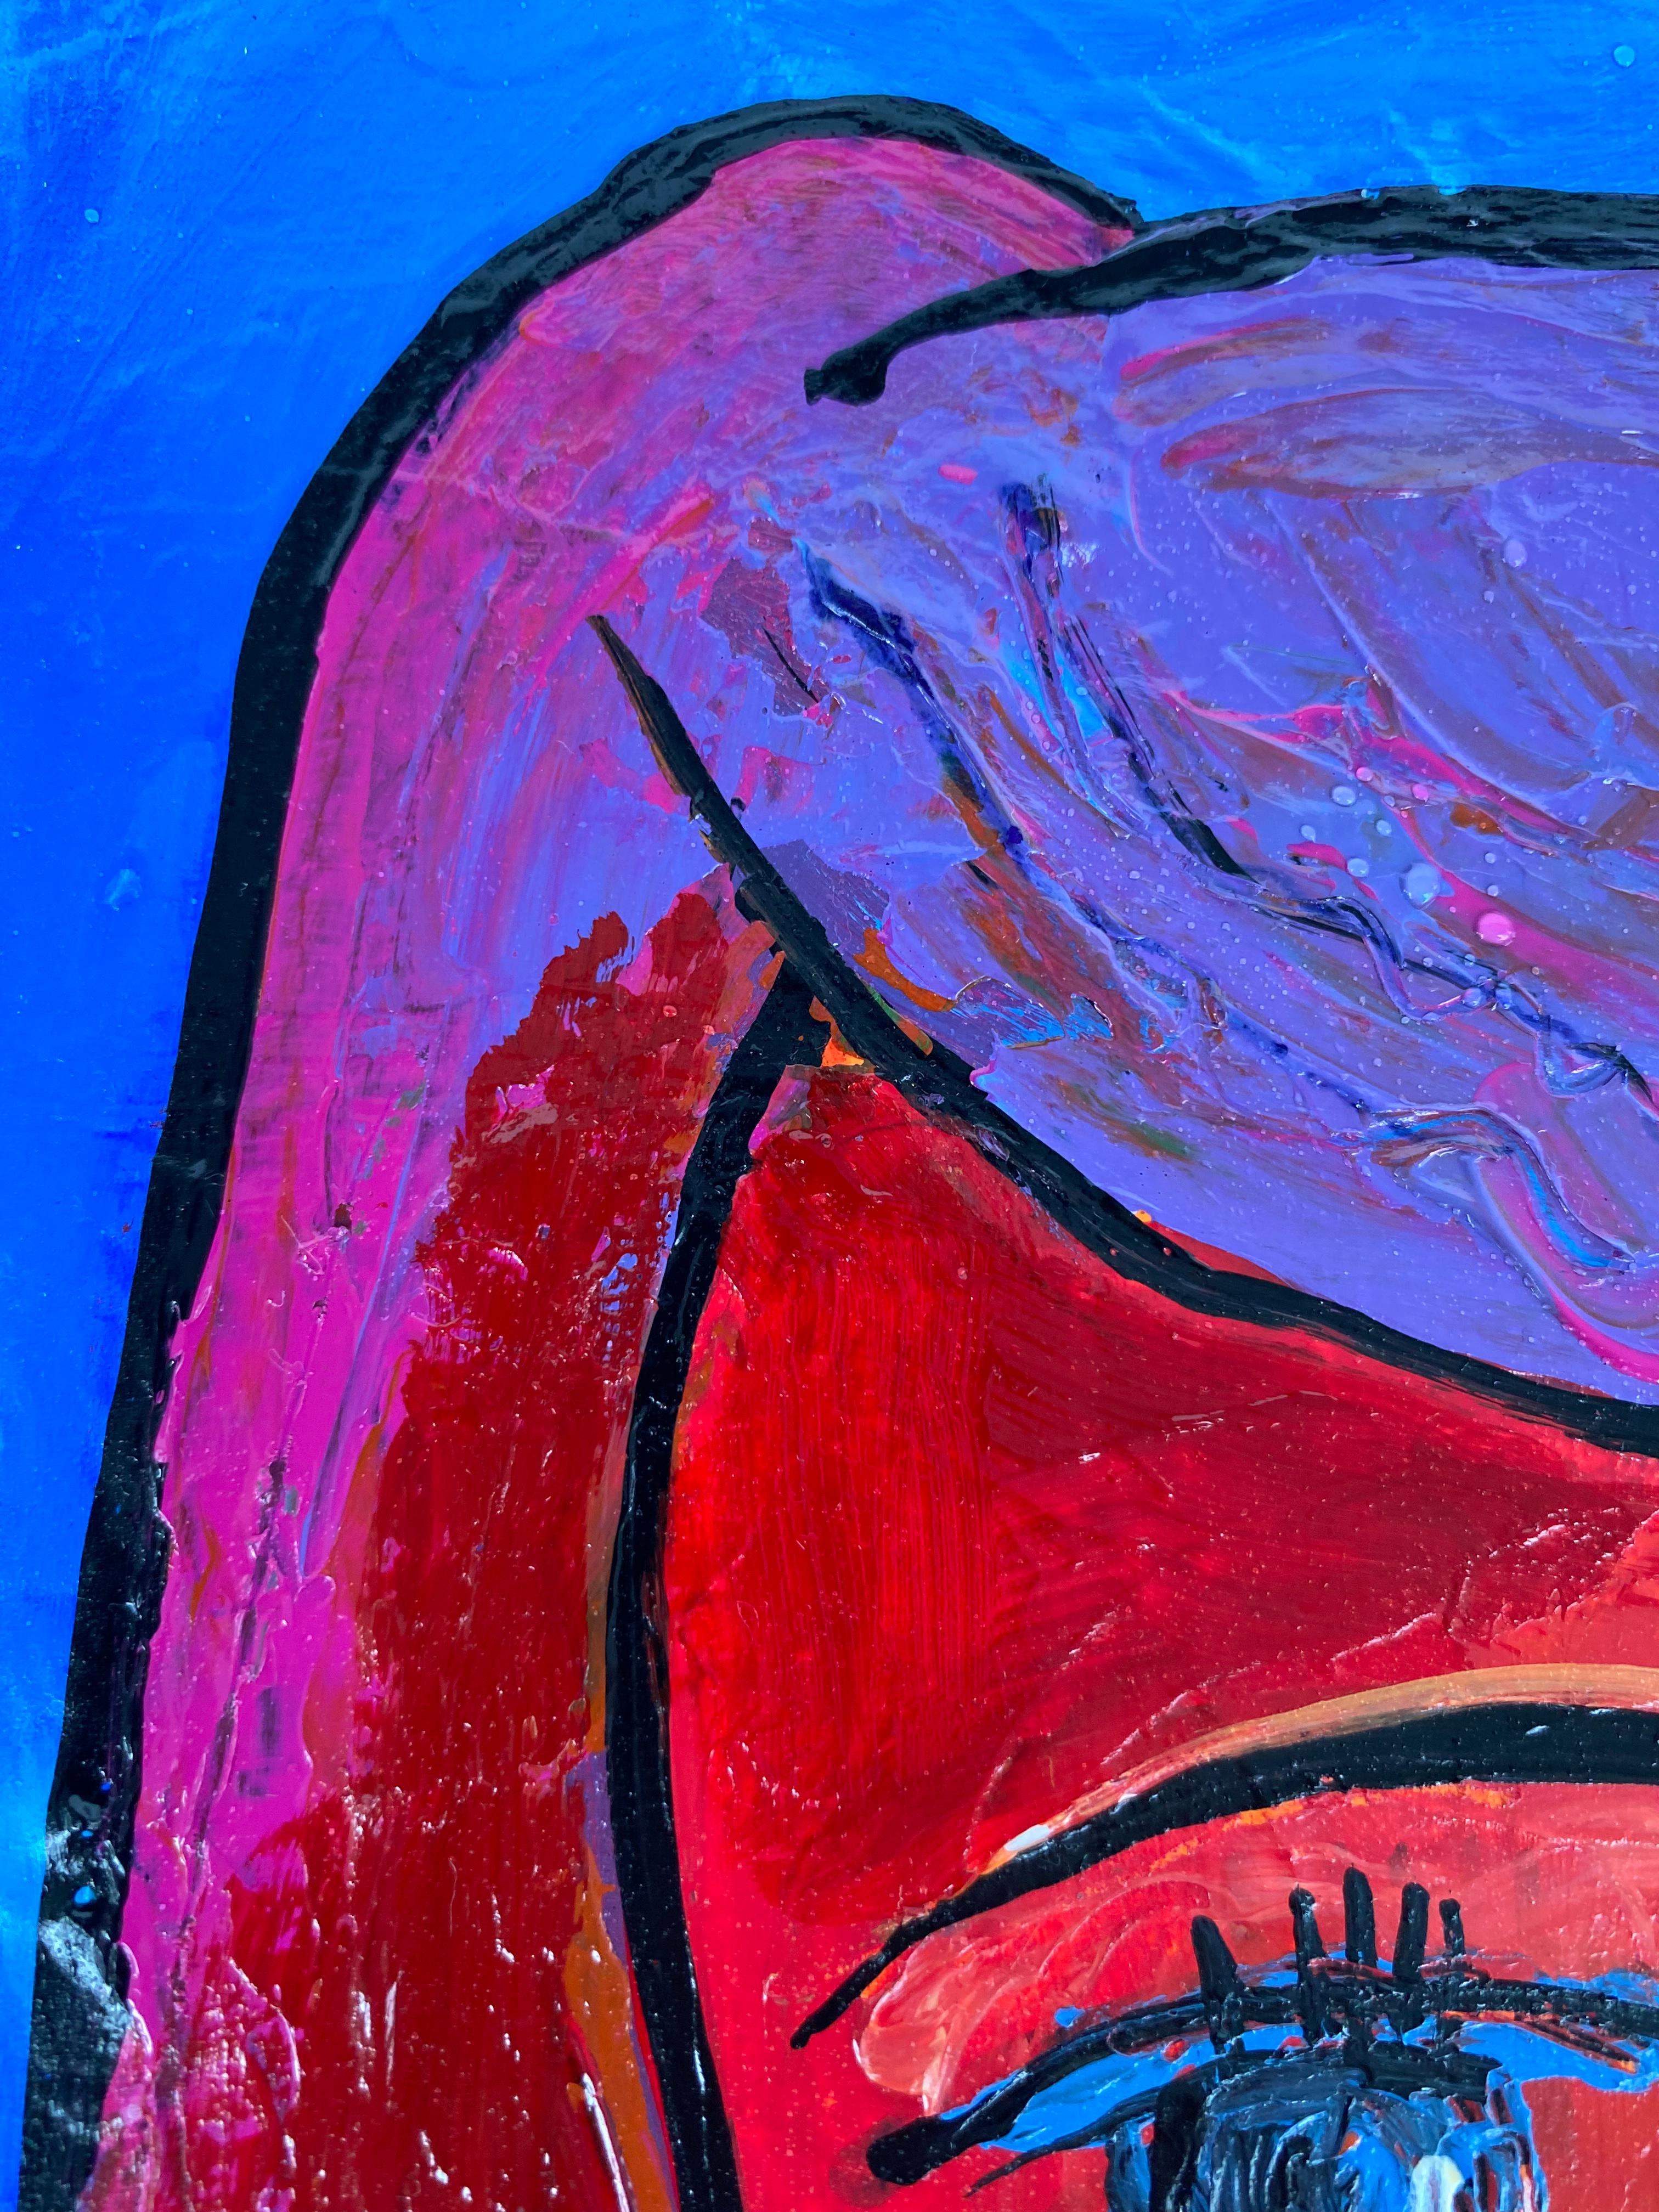 Cuban American Artist Juan Navarrete abstract painting woman with red hair, 2022

Offered for sale is an abstract painting by seasoned Cuban-American artist Juan Navarrete titled Woman with Red Hair